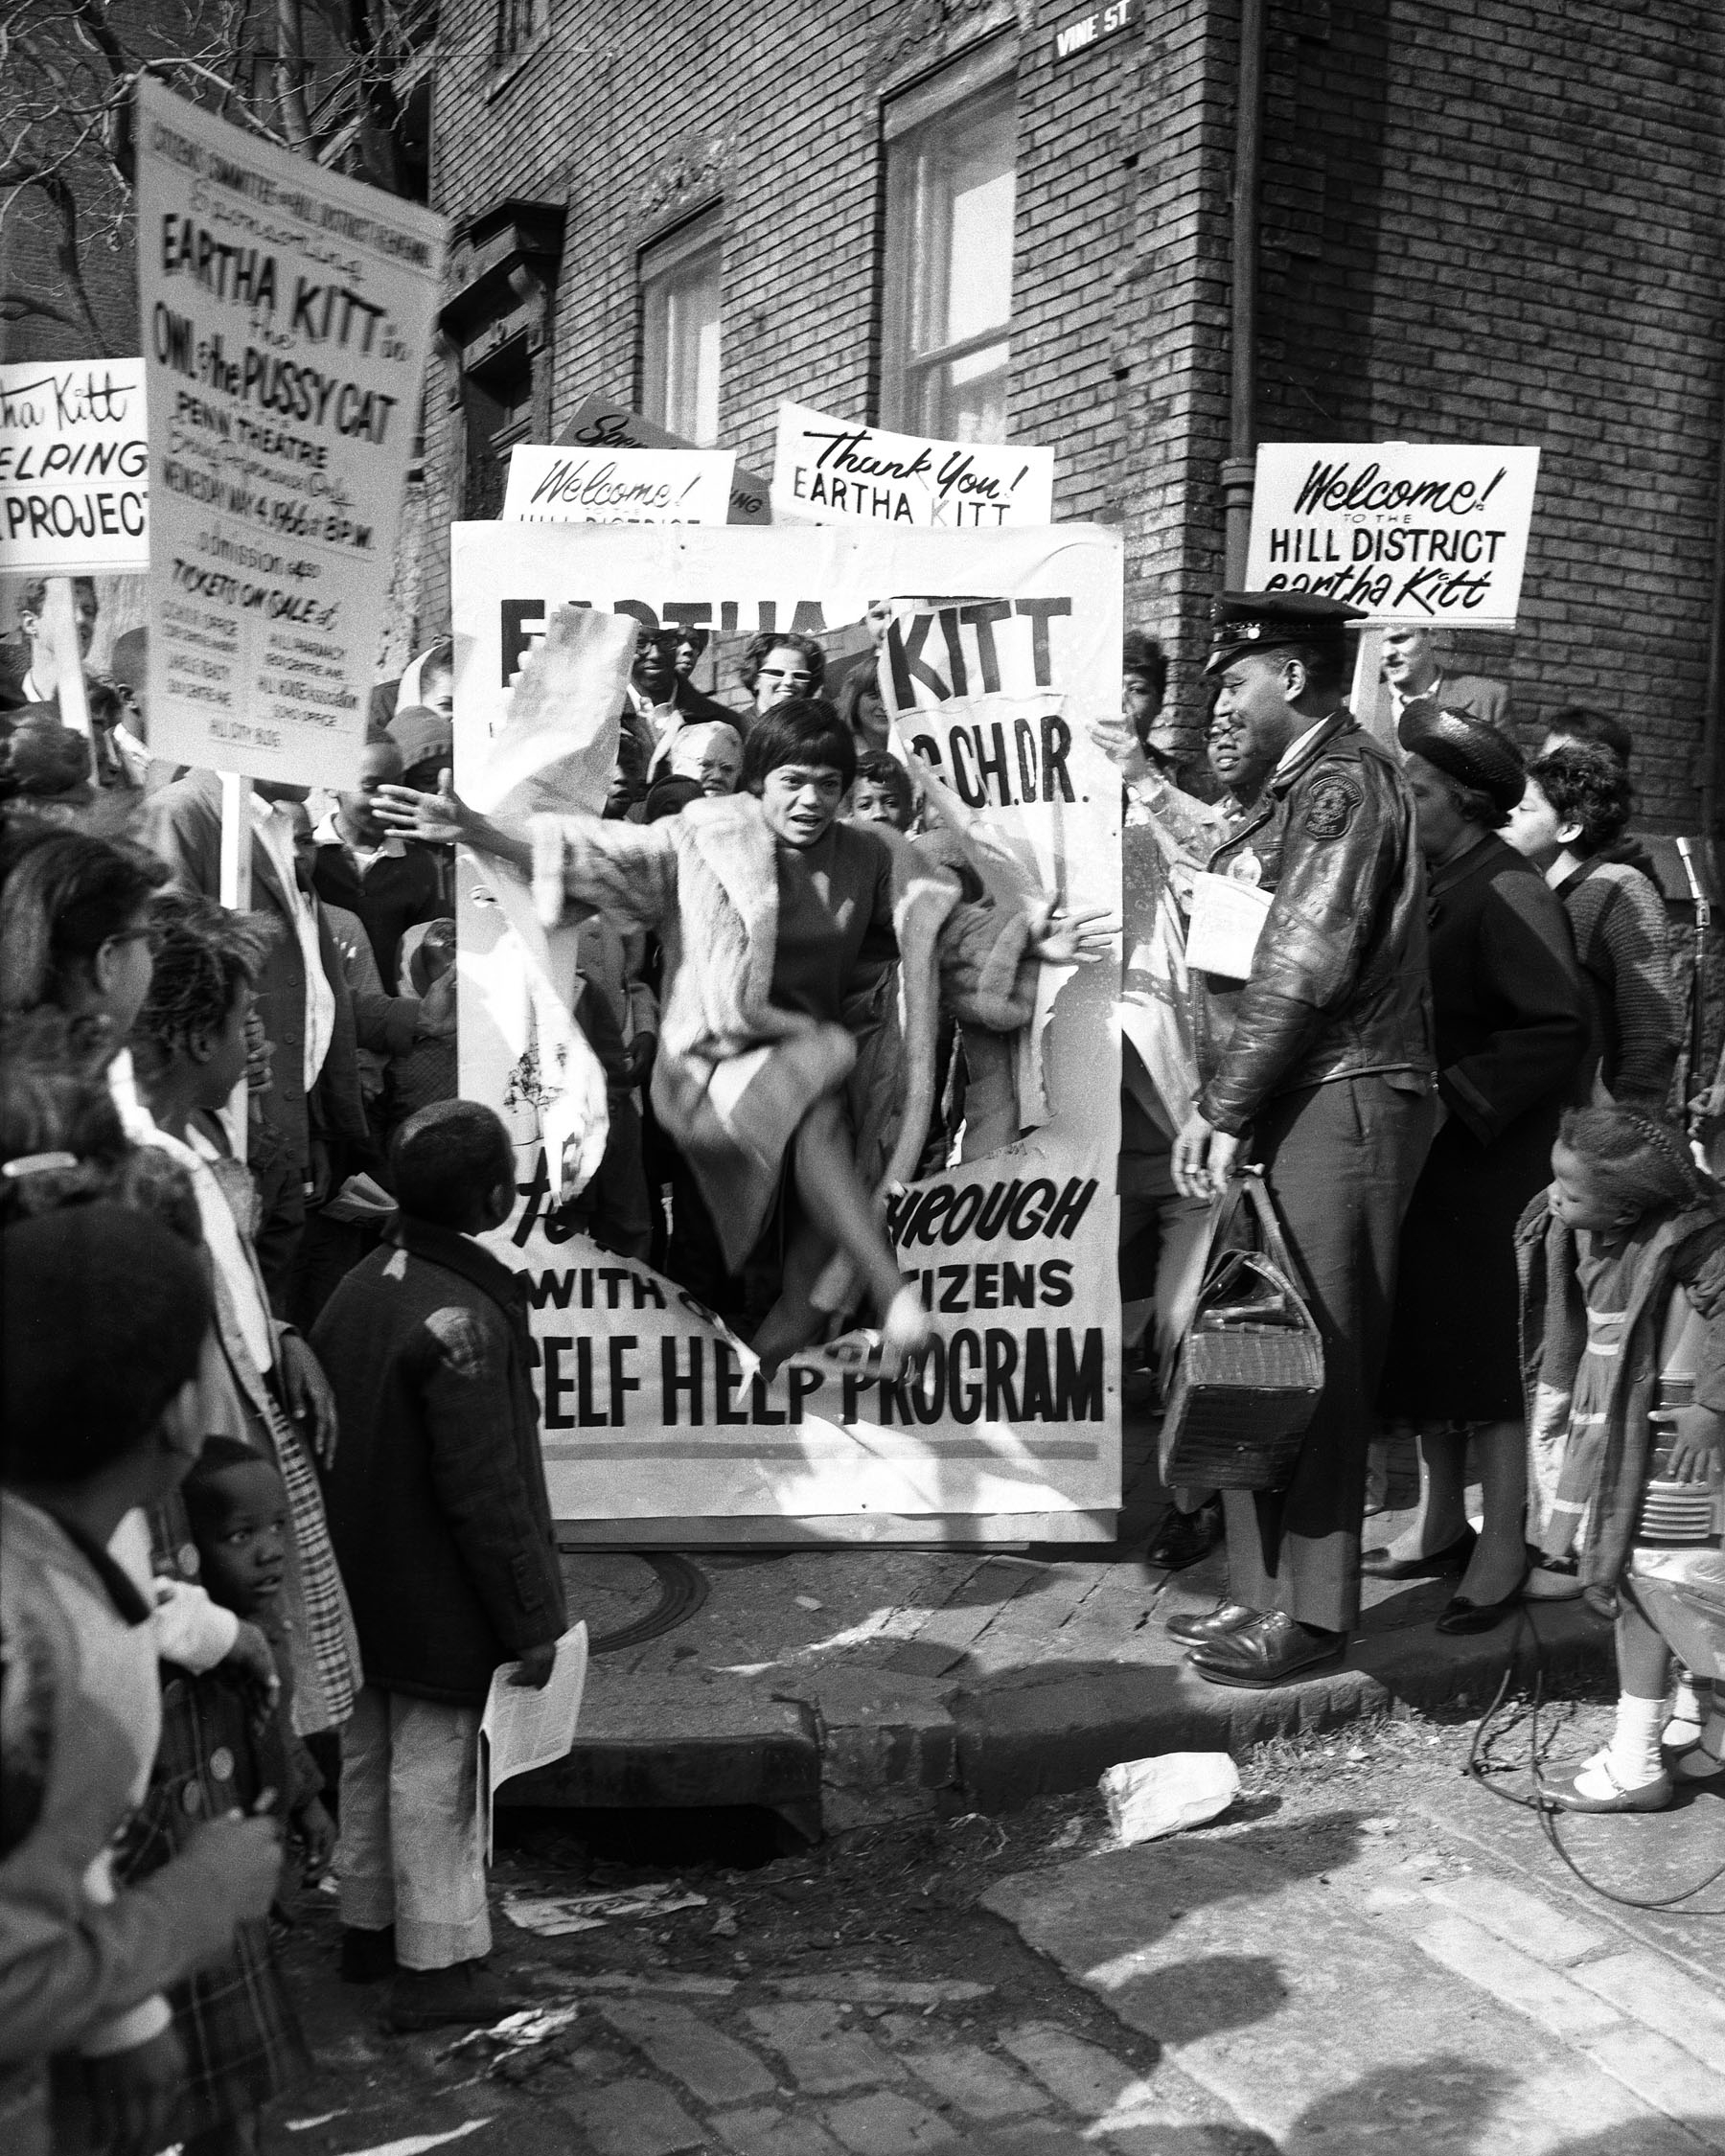 Charles Teenie Harris photo of Eartha Kitt leaping though poster to launch self help drive by Citizens Committee on Hill District Renewal, surrounded by crowd, including police officer Harvey Adams, Vine and Colwell Streets Hill District